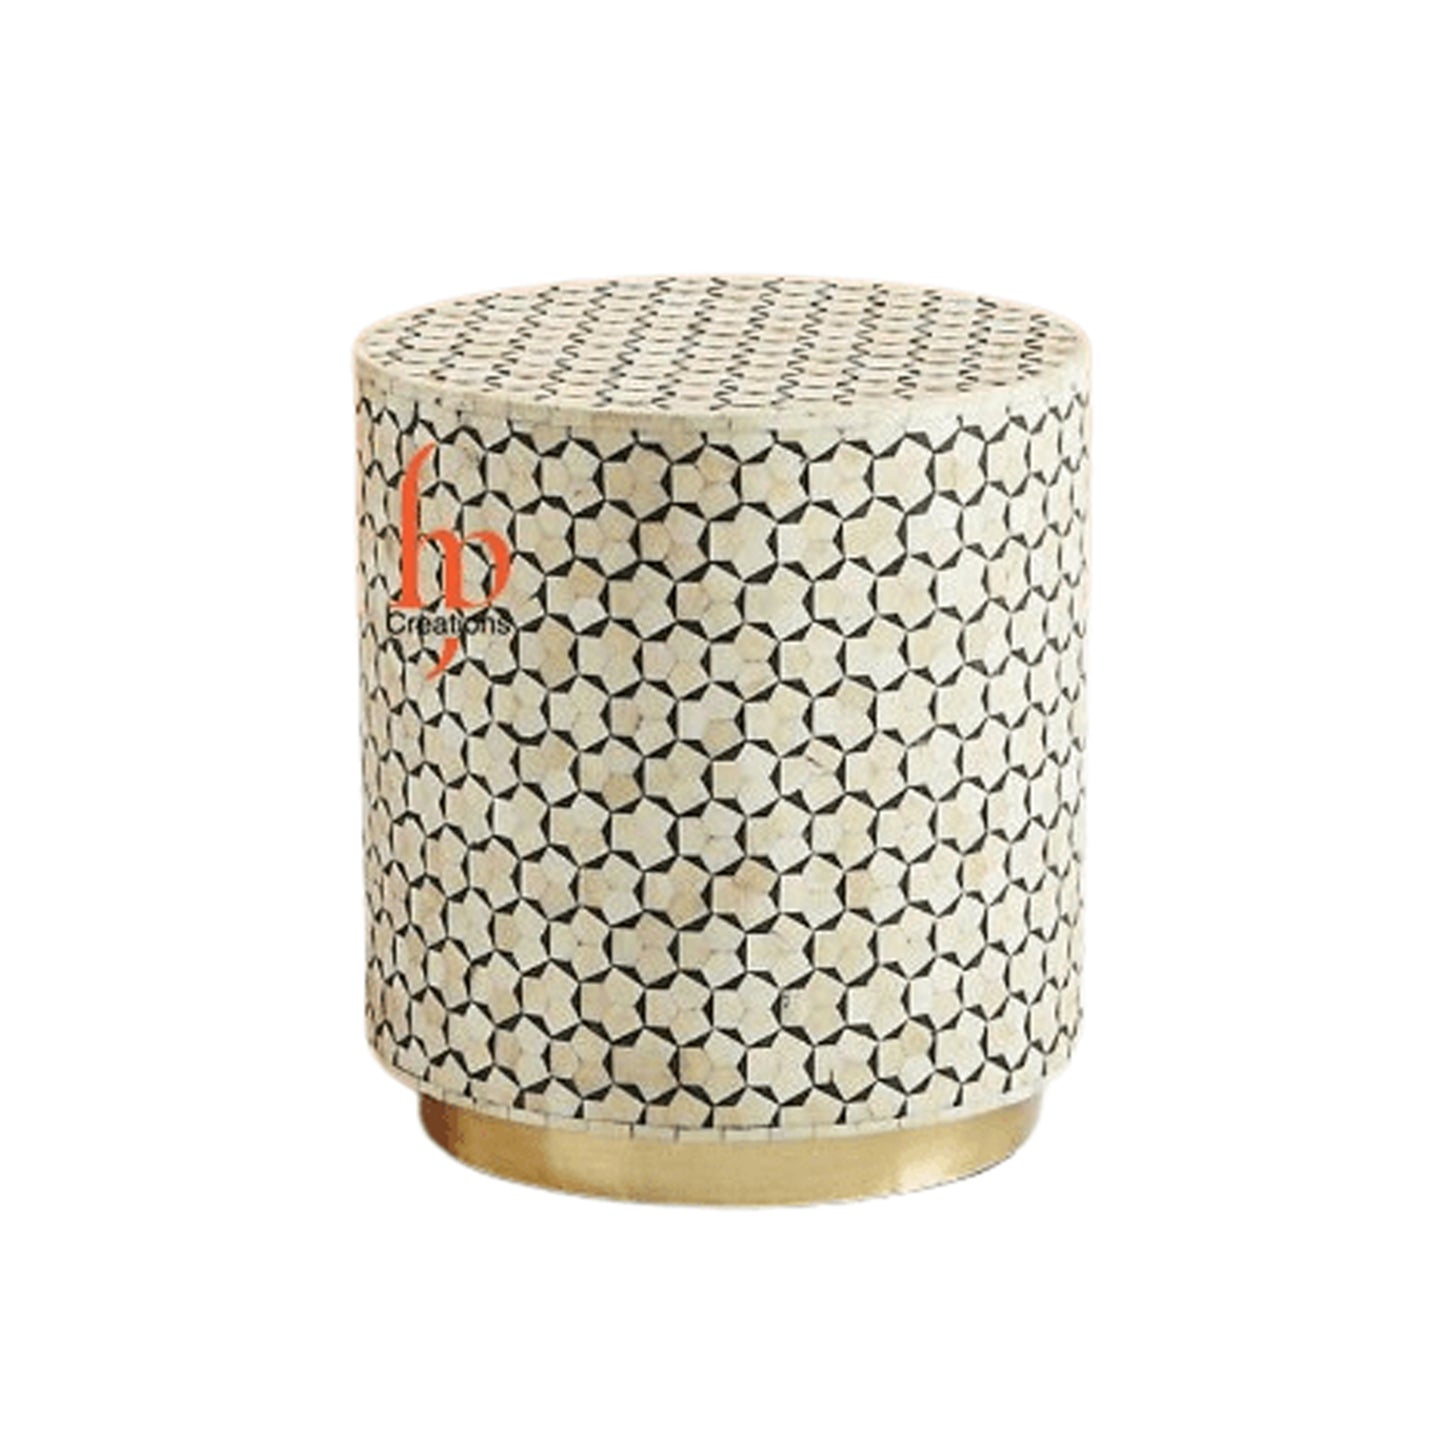 Personalized Bone Inlay Round Stool Home Decor Furniture Design Attractive Look Side Table Dinning Stool Classic Vintage Furniture